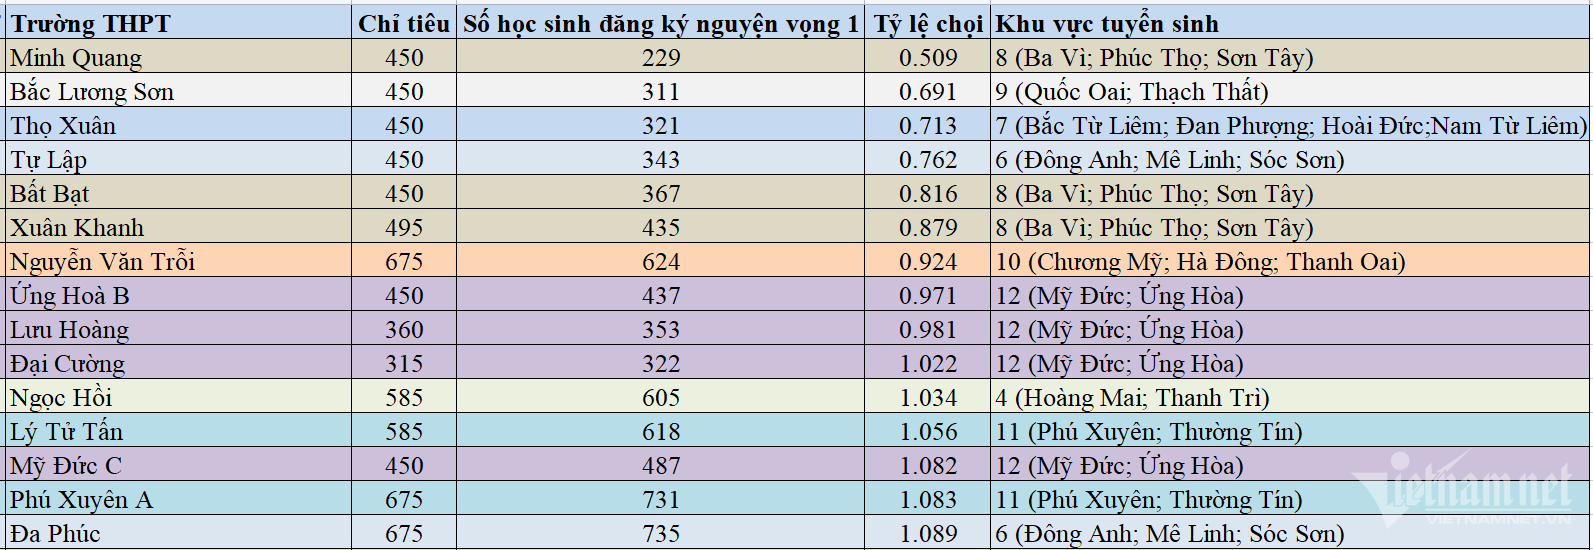 w-ty-le-choi-thap-nhat-hn-1-1052.png